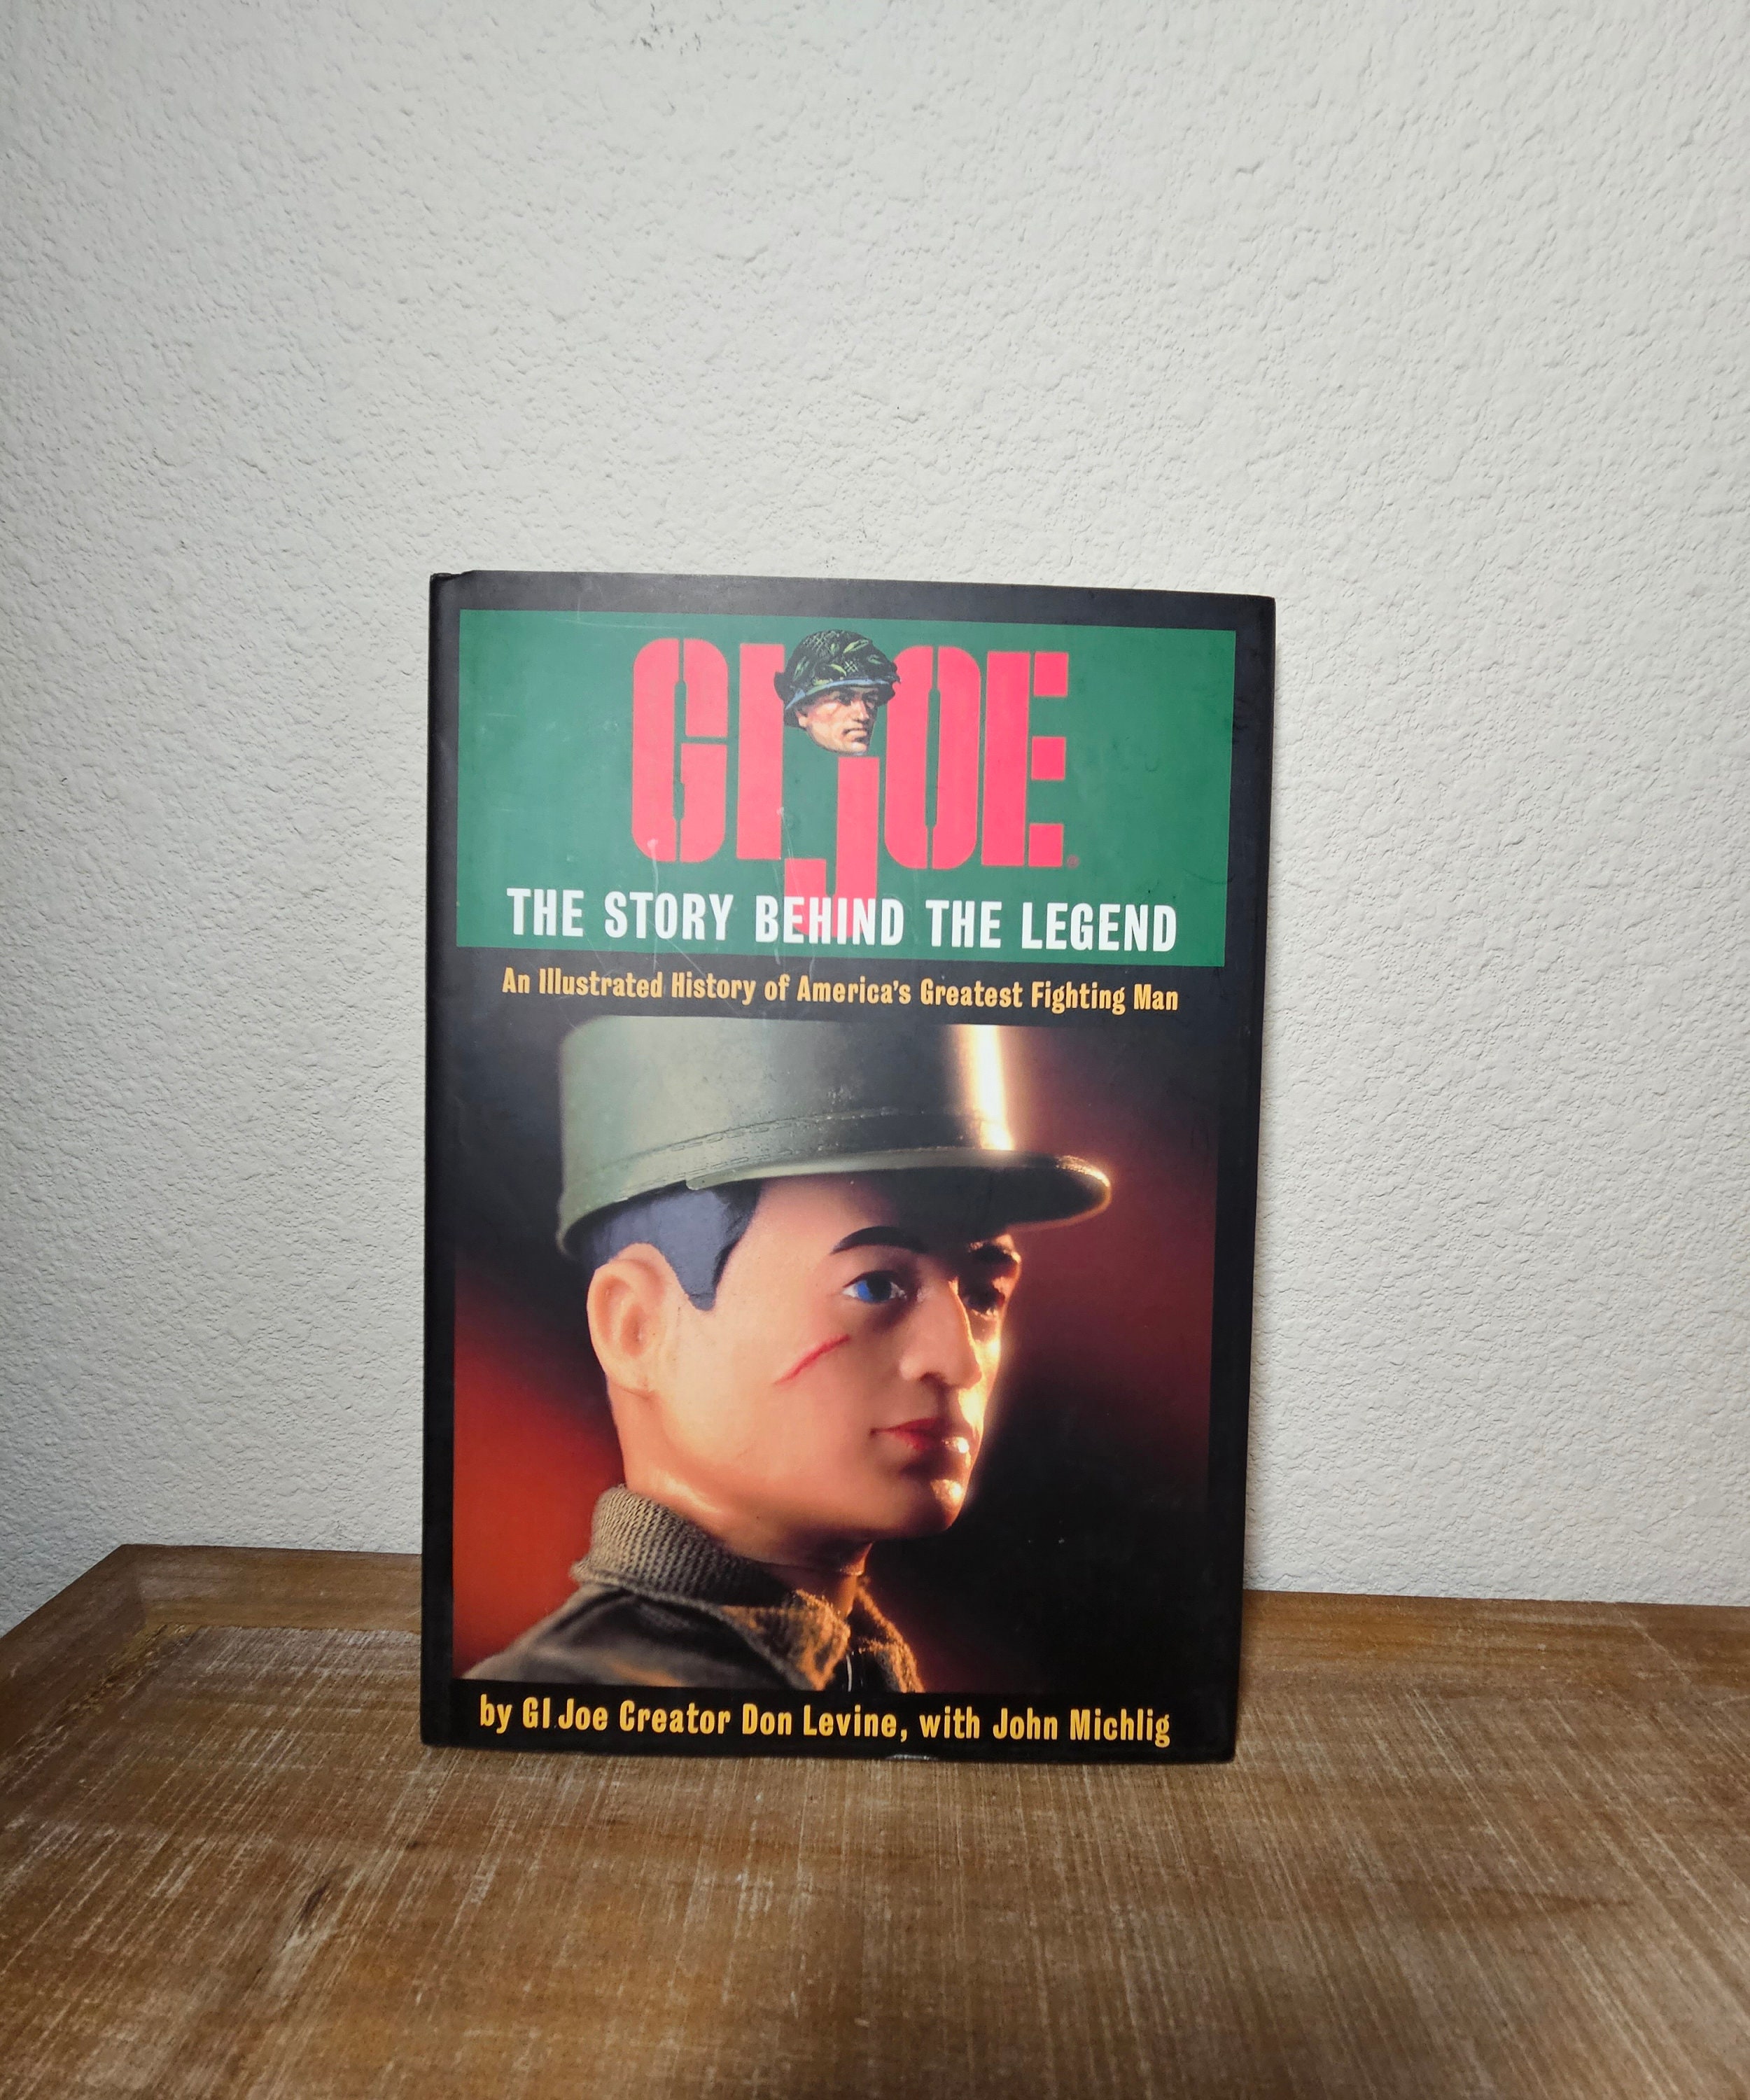 GI Joe: The Story Behind the Legend - An Illustrated History of